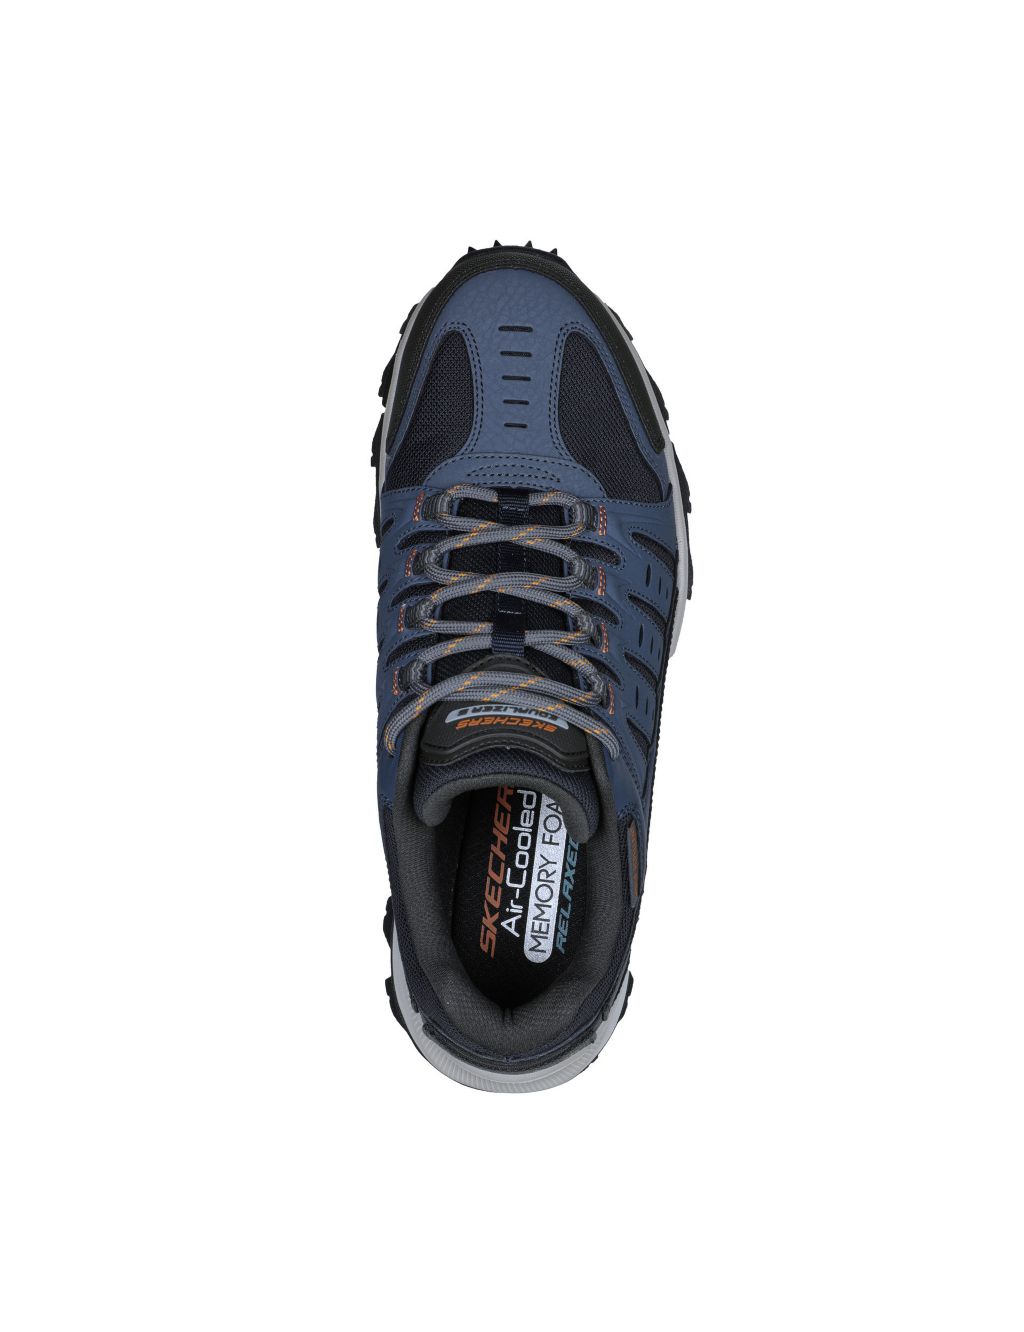 Equalizer 5.0 Trail Solix Lace Up Trainers image 3